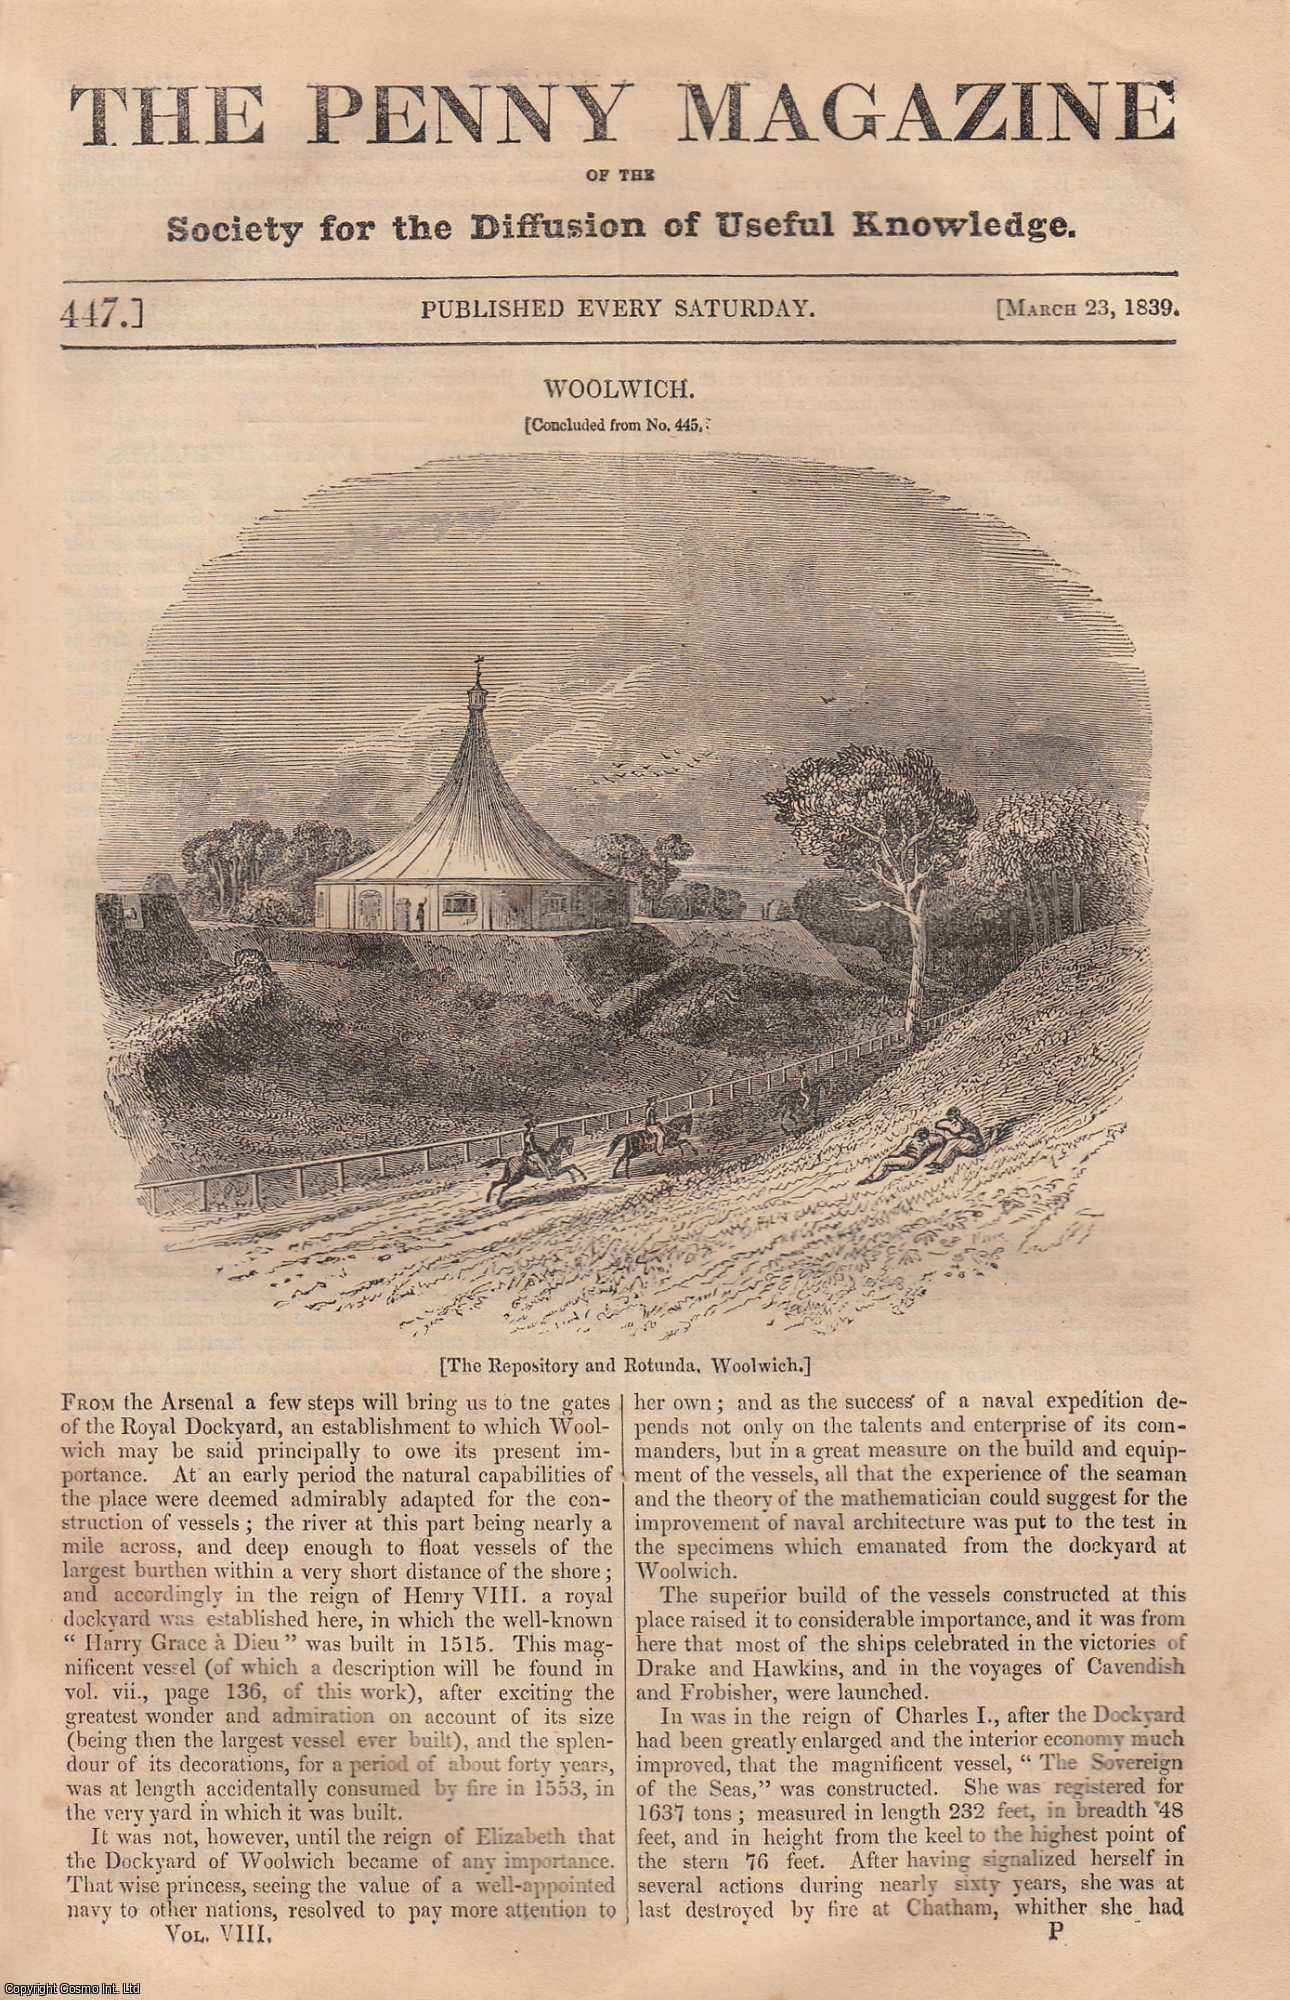 ---. - Woolwich (concl) (Grand Military & Naval Depot for England); Deer-Stalking in The Highlands (part 1) (Scottish Forests); Progress of The Art of Illuminating Manuscripts (part 5); Sword-Dancing in Northumberland, etc. Issue No. 447, 1839. A complete rare weekly issue of the Penny Magazine, 1839.